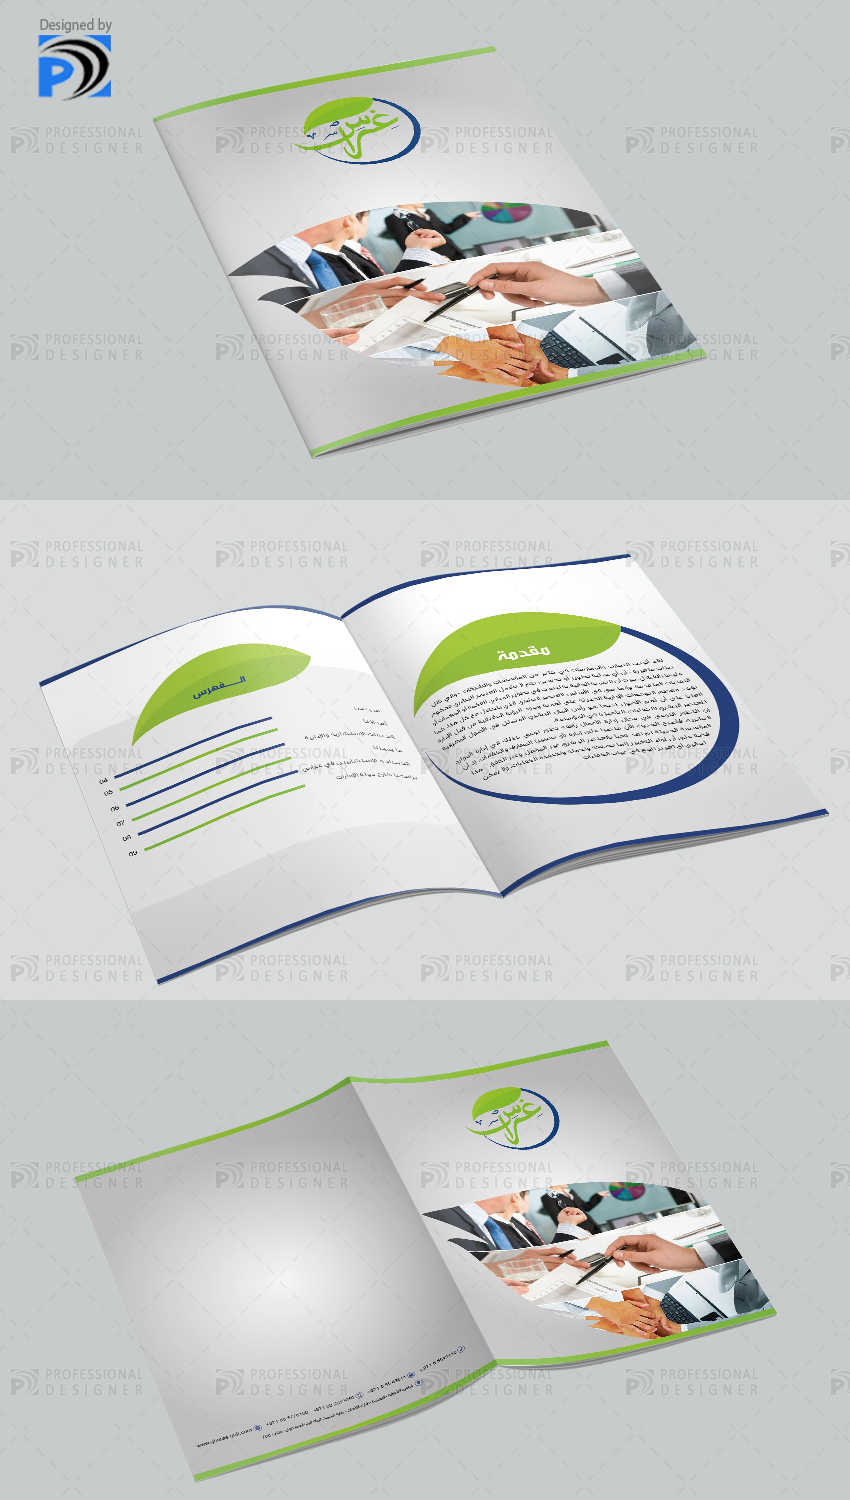 Handbook design for training and Consulting centr